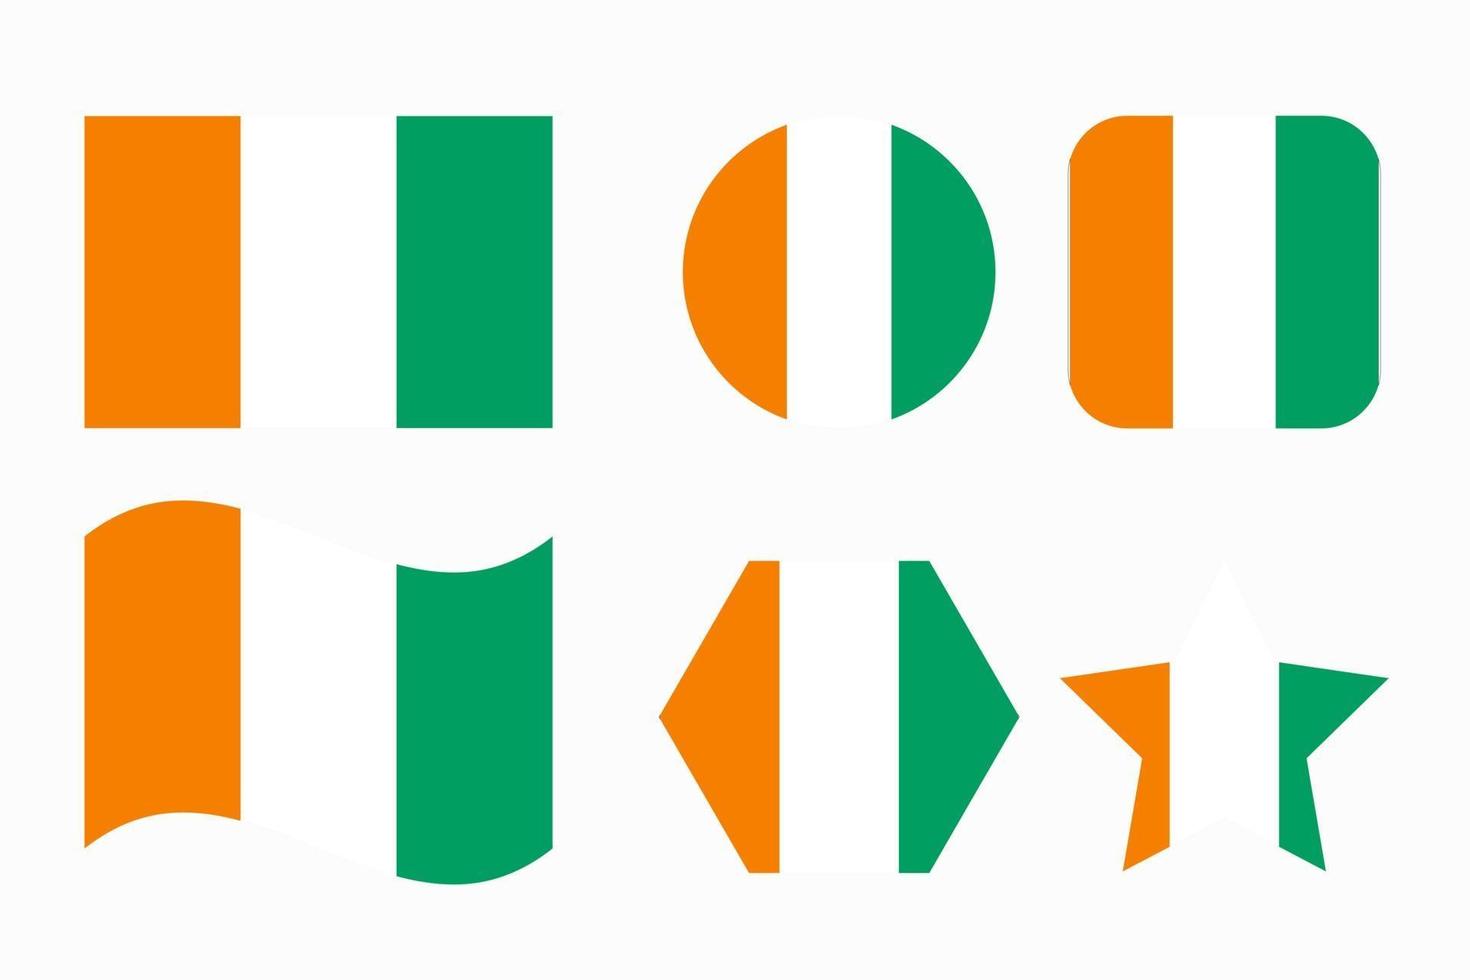 Cote d'Ivoire flag simple illustration for independence day or election vector